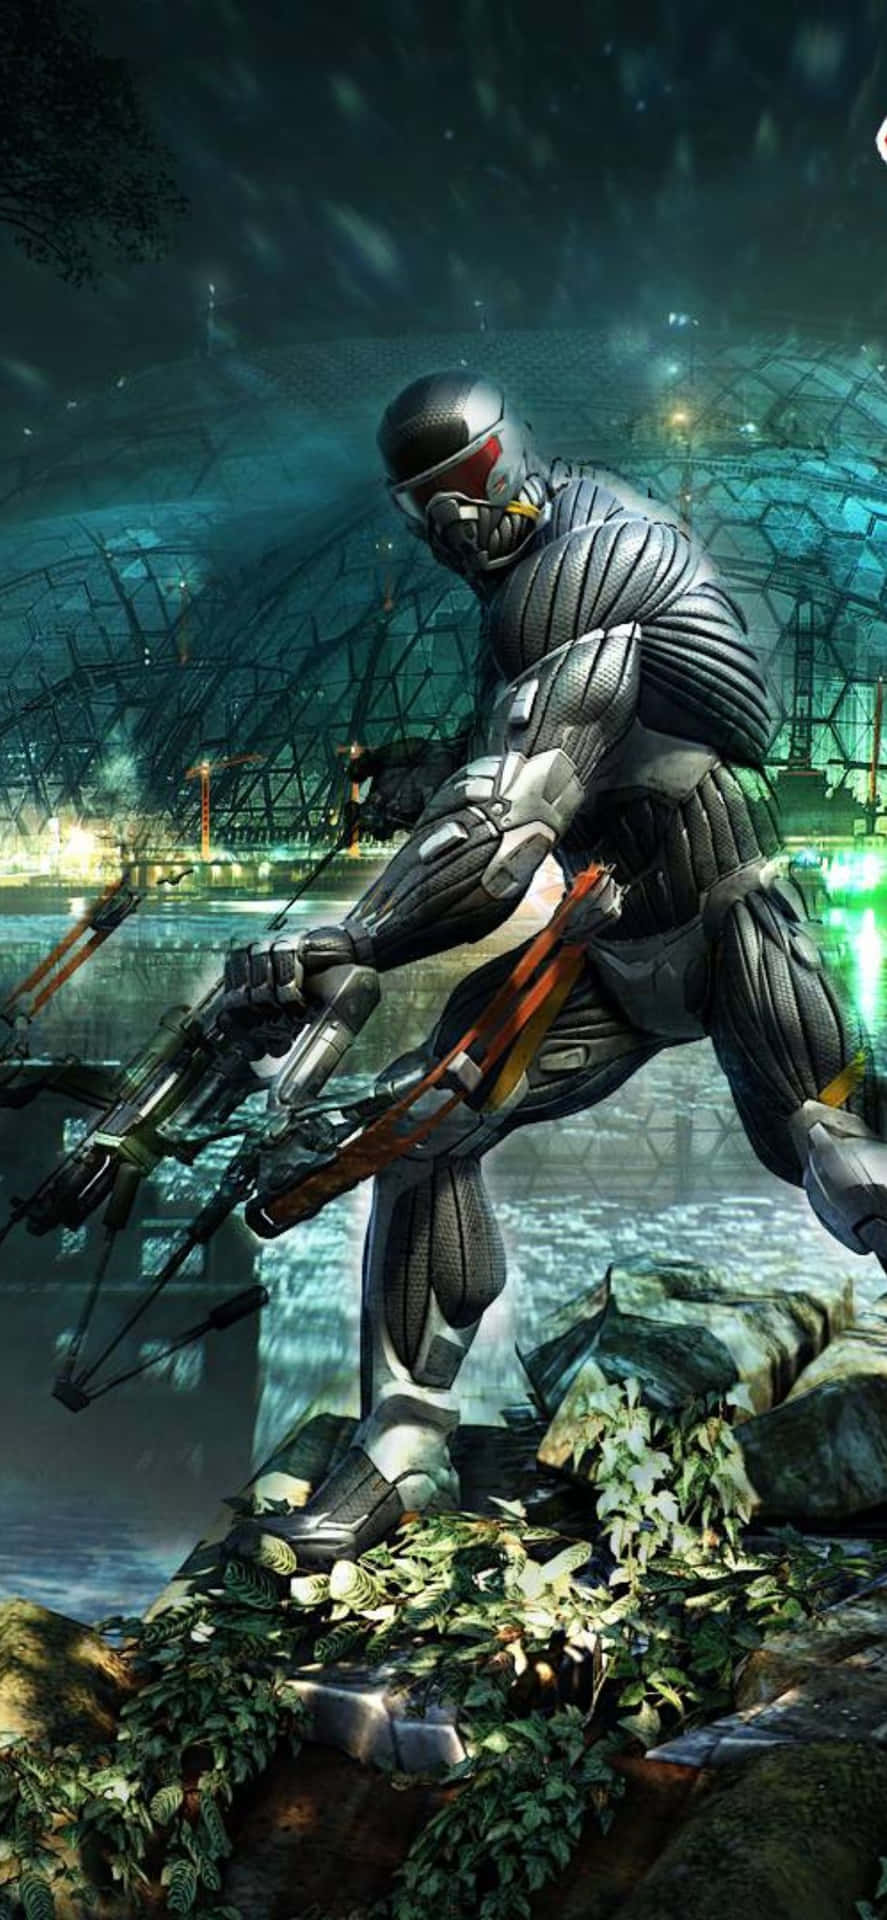 Open the heat of battle with Crysis 3 on your iphone X